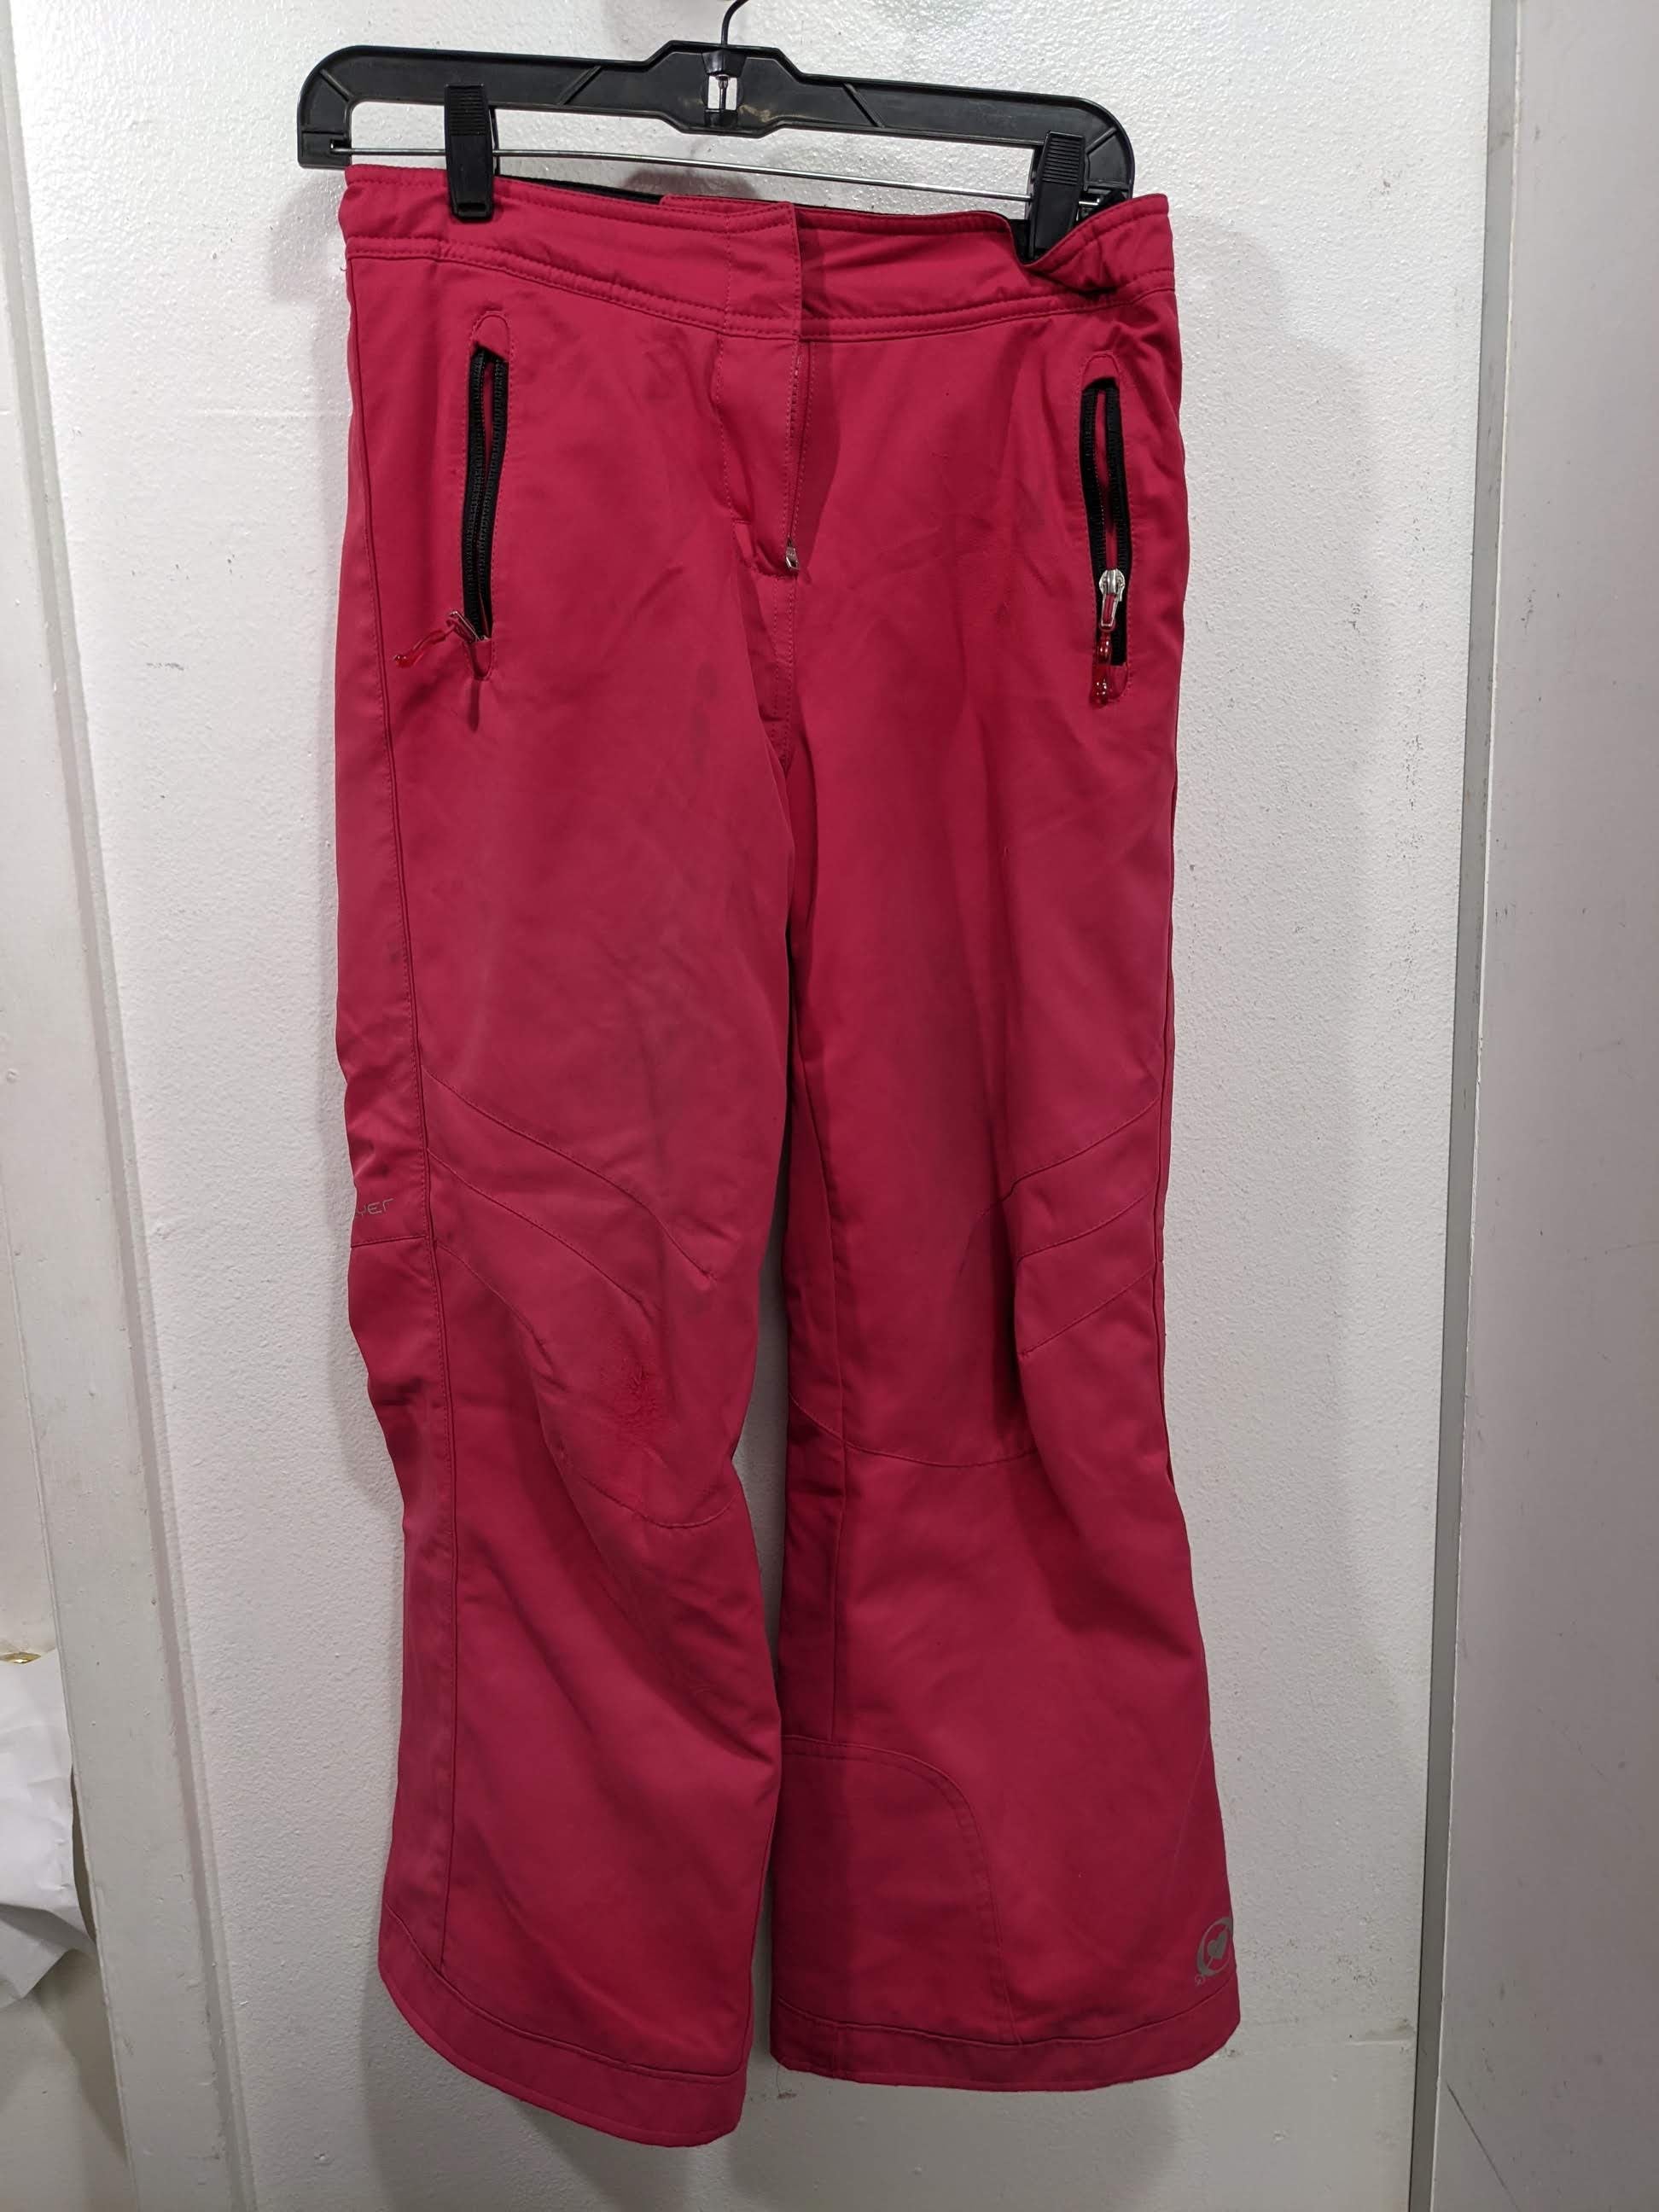 Obermeyer EWS Youth Ski/Board Pants Size 12 Youth Large Pink Used